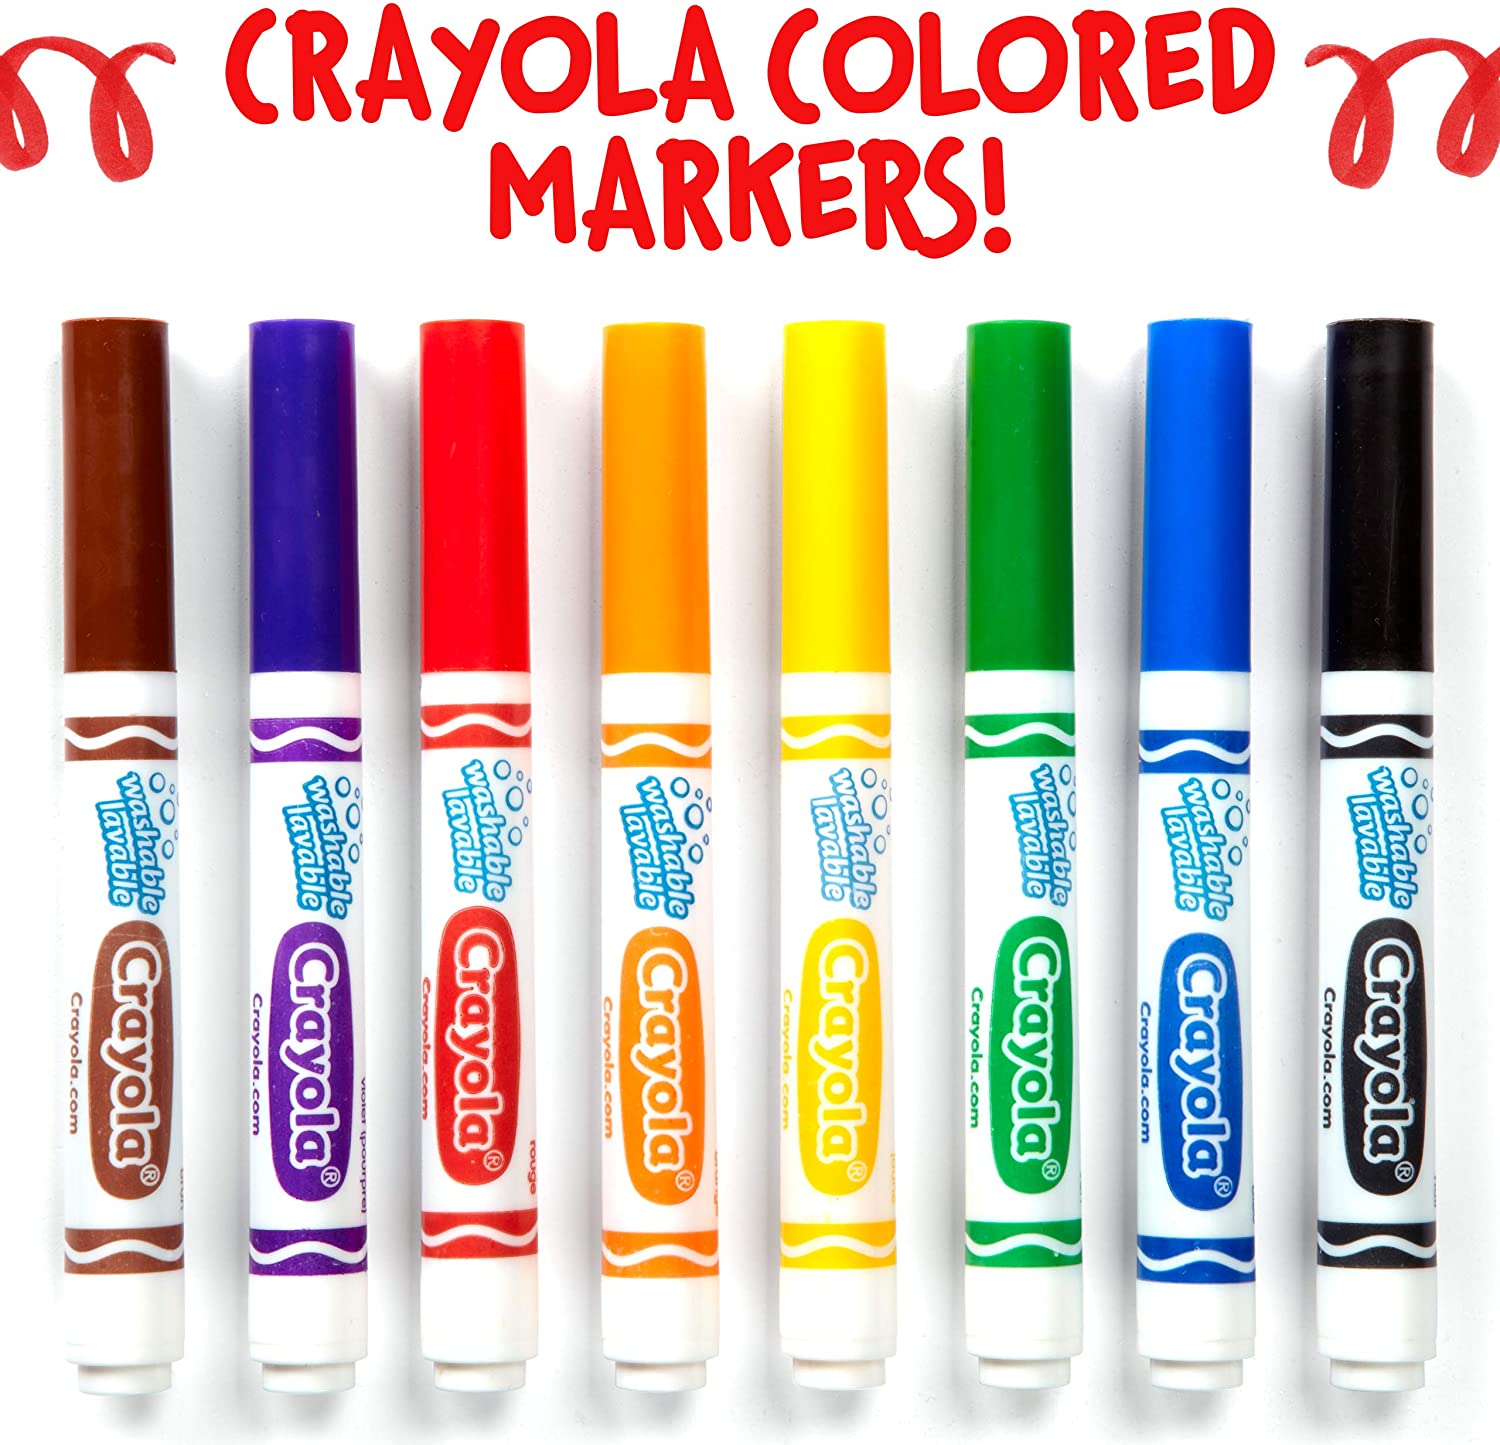 Crayola Ultra-Clean Washable Bulk Markers, Brown, Pack of 12 